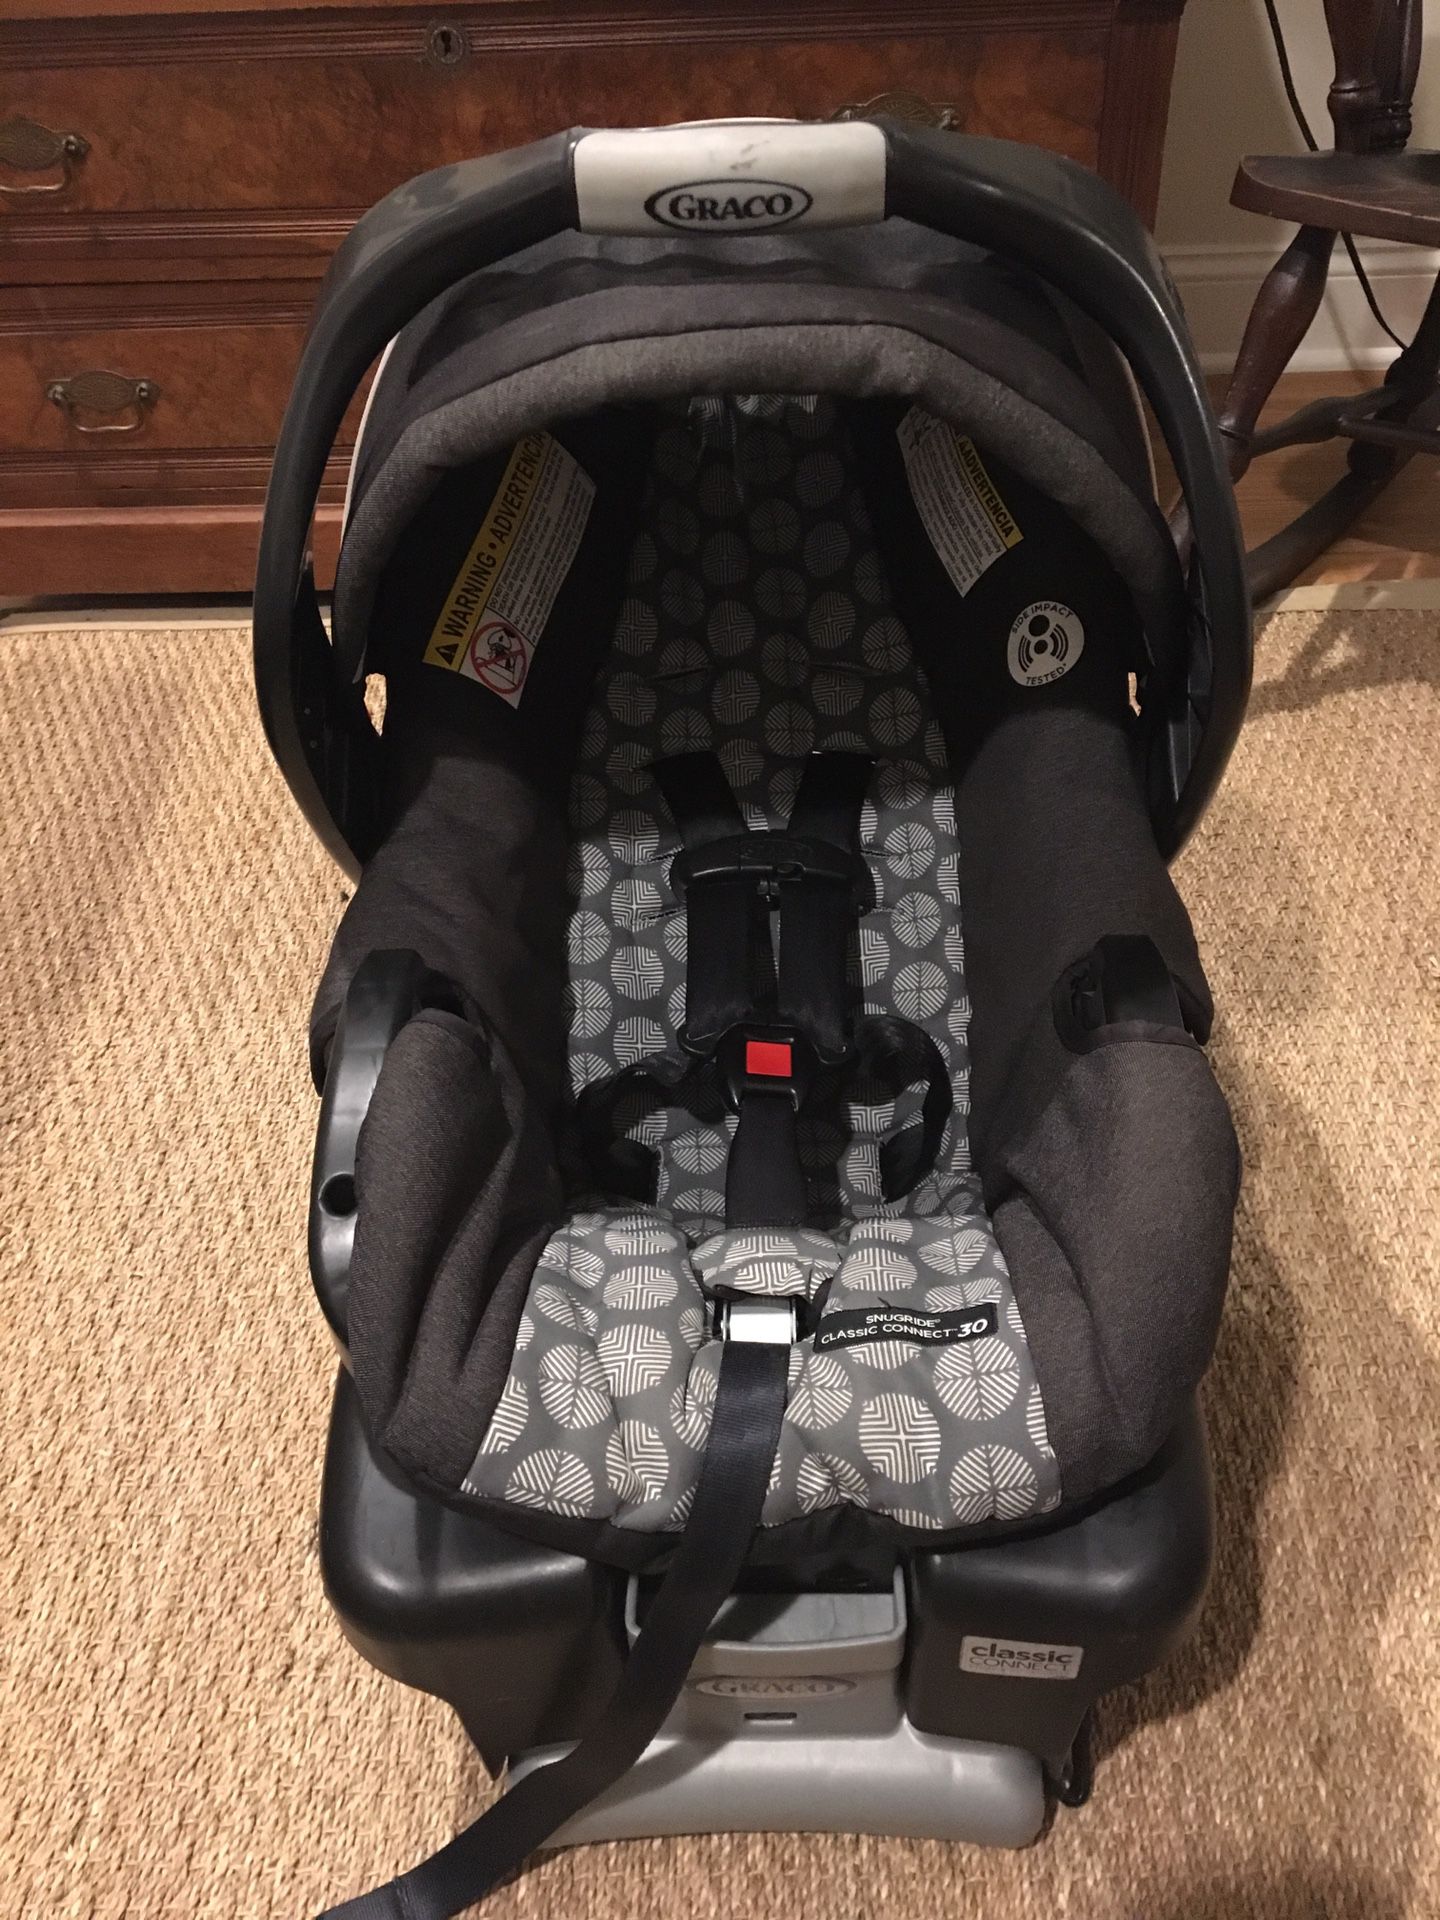 Graco Classic Connect car seat